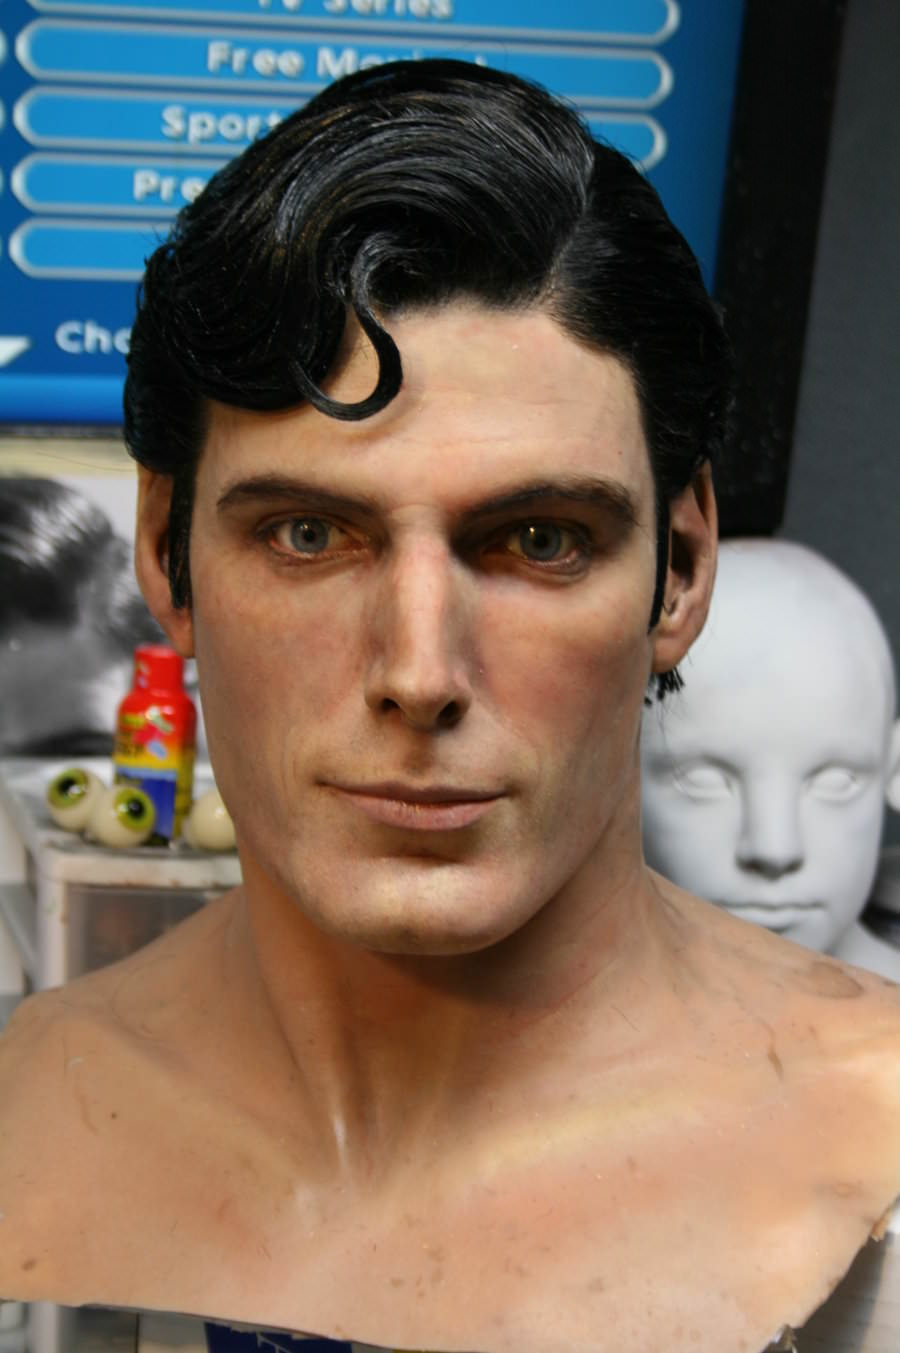 christopher reeve sculpture by bobbyc1225 d32lvz4